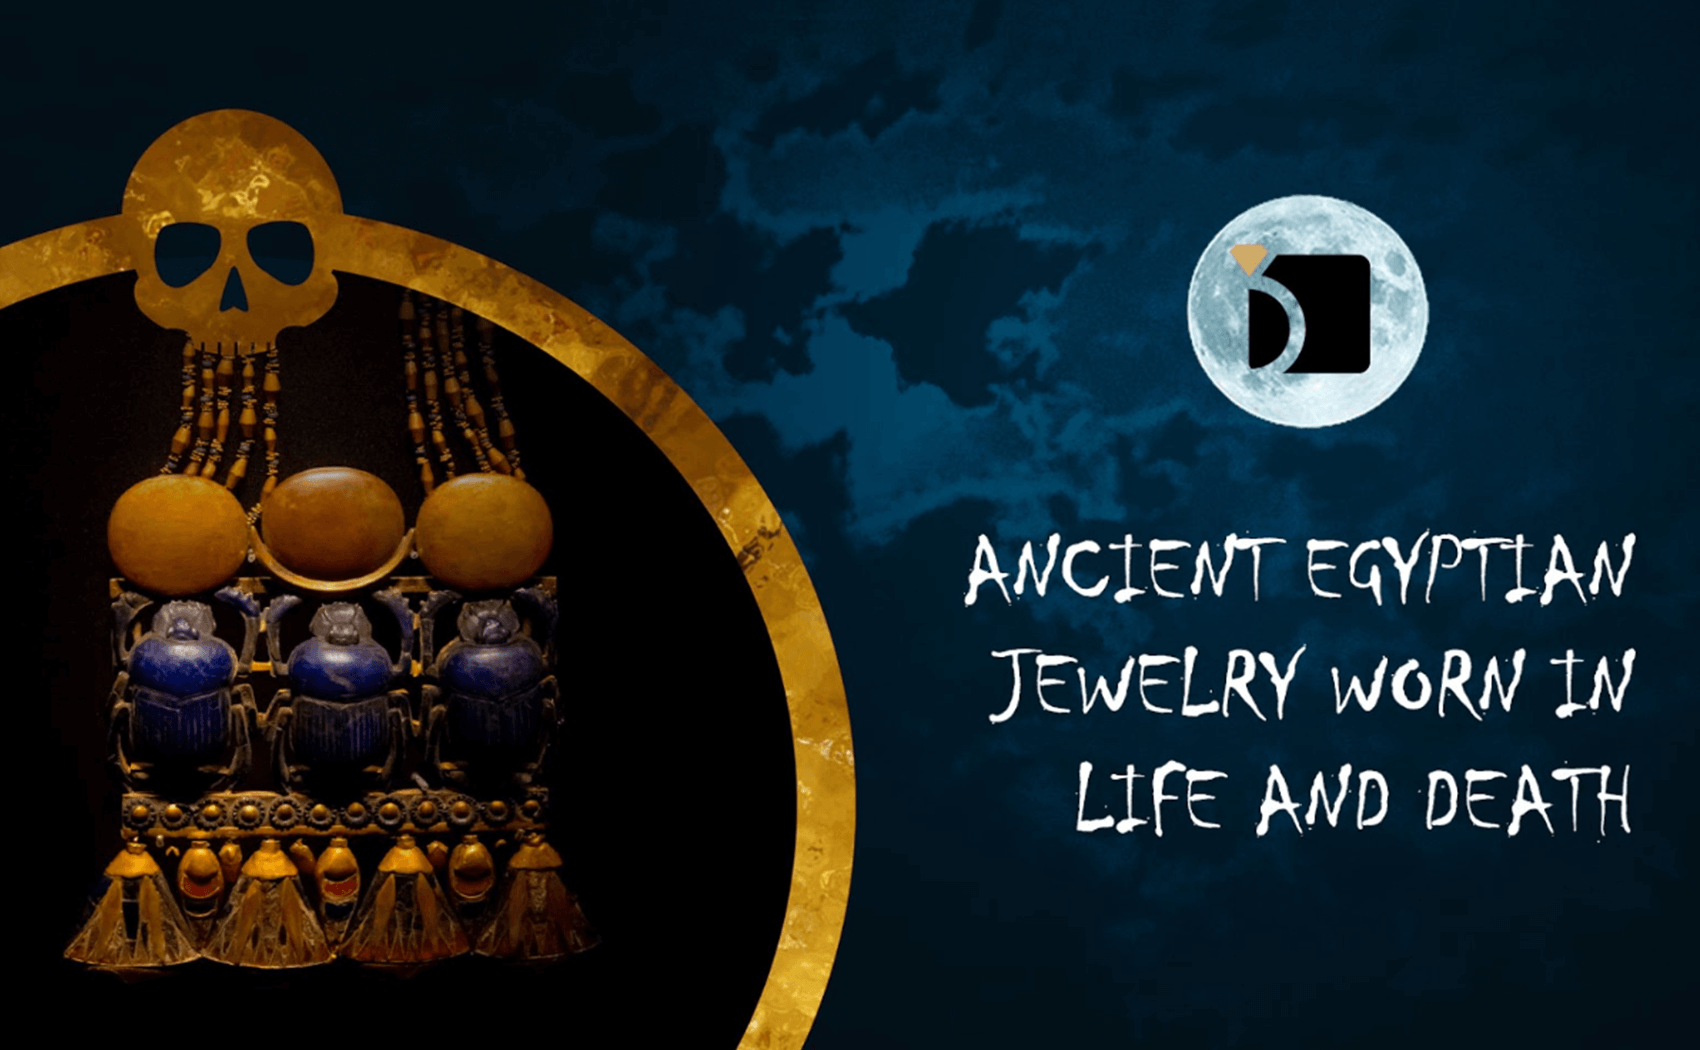 Image Showing Ancient Egyptian Jewelry